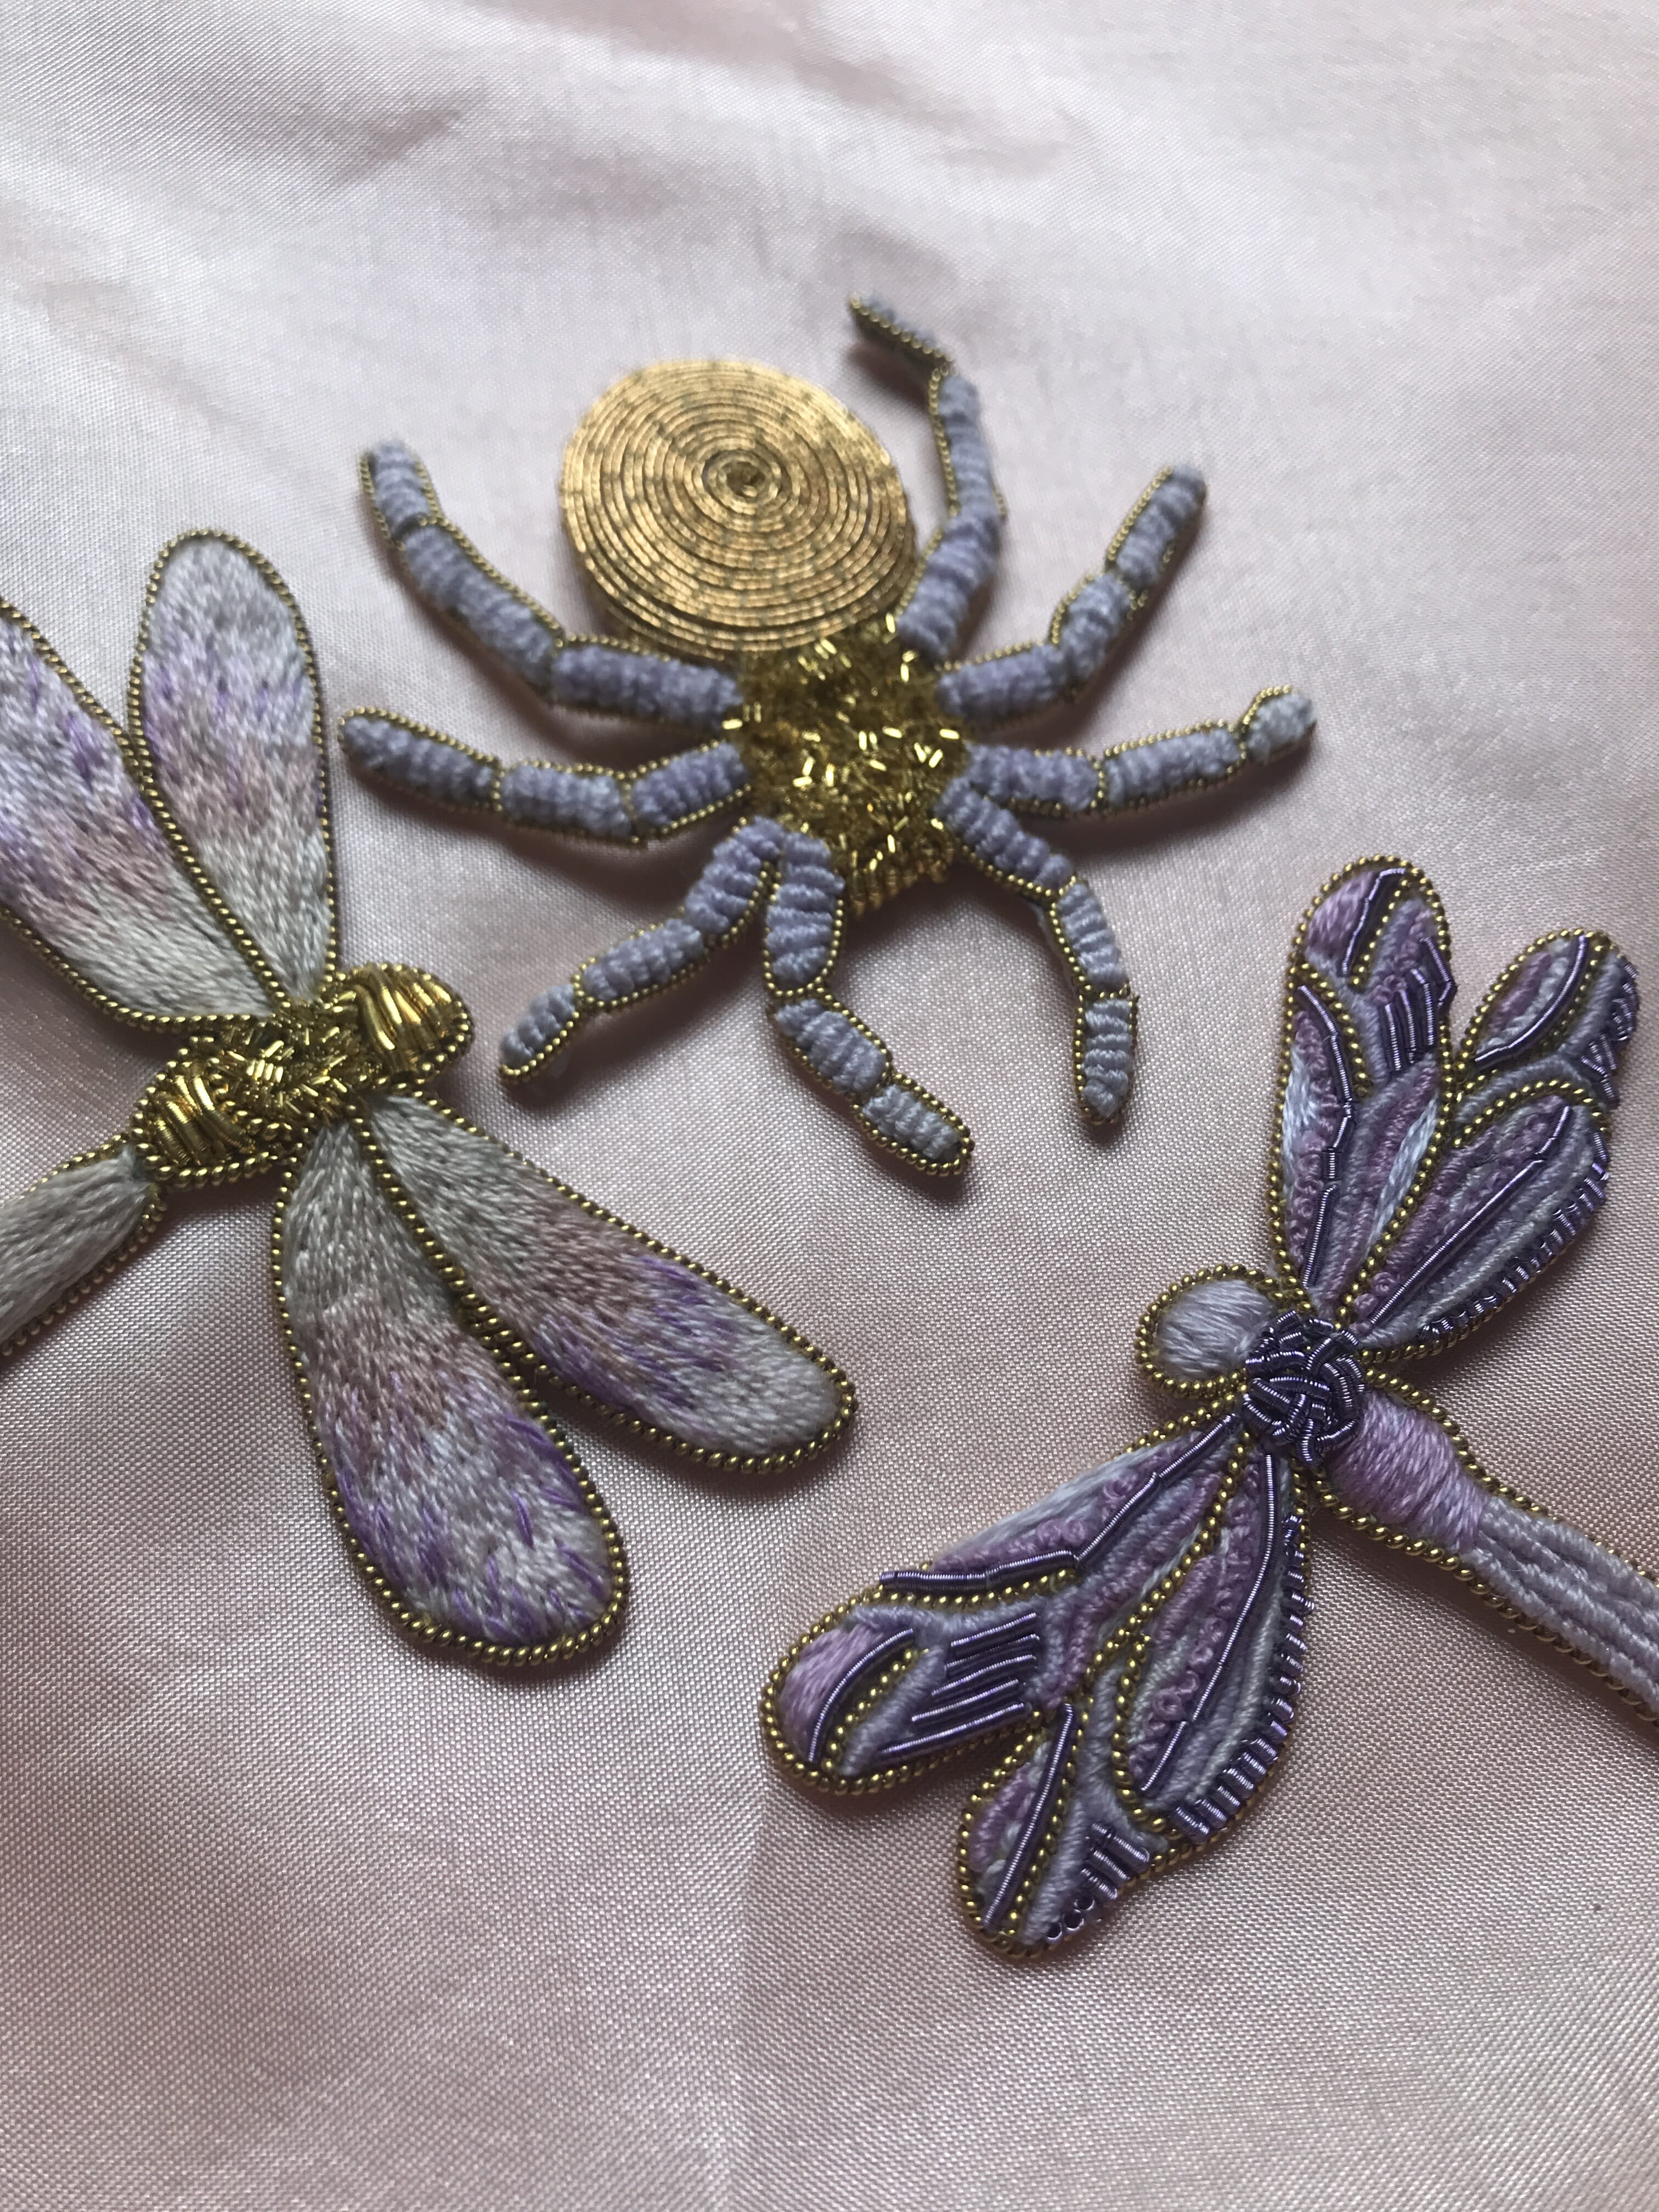 Rie's goldwork spiders